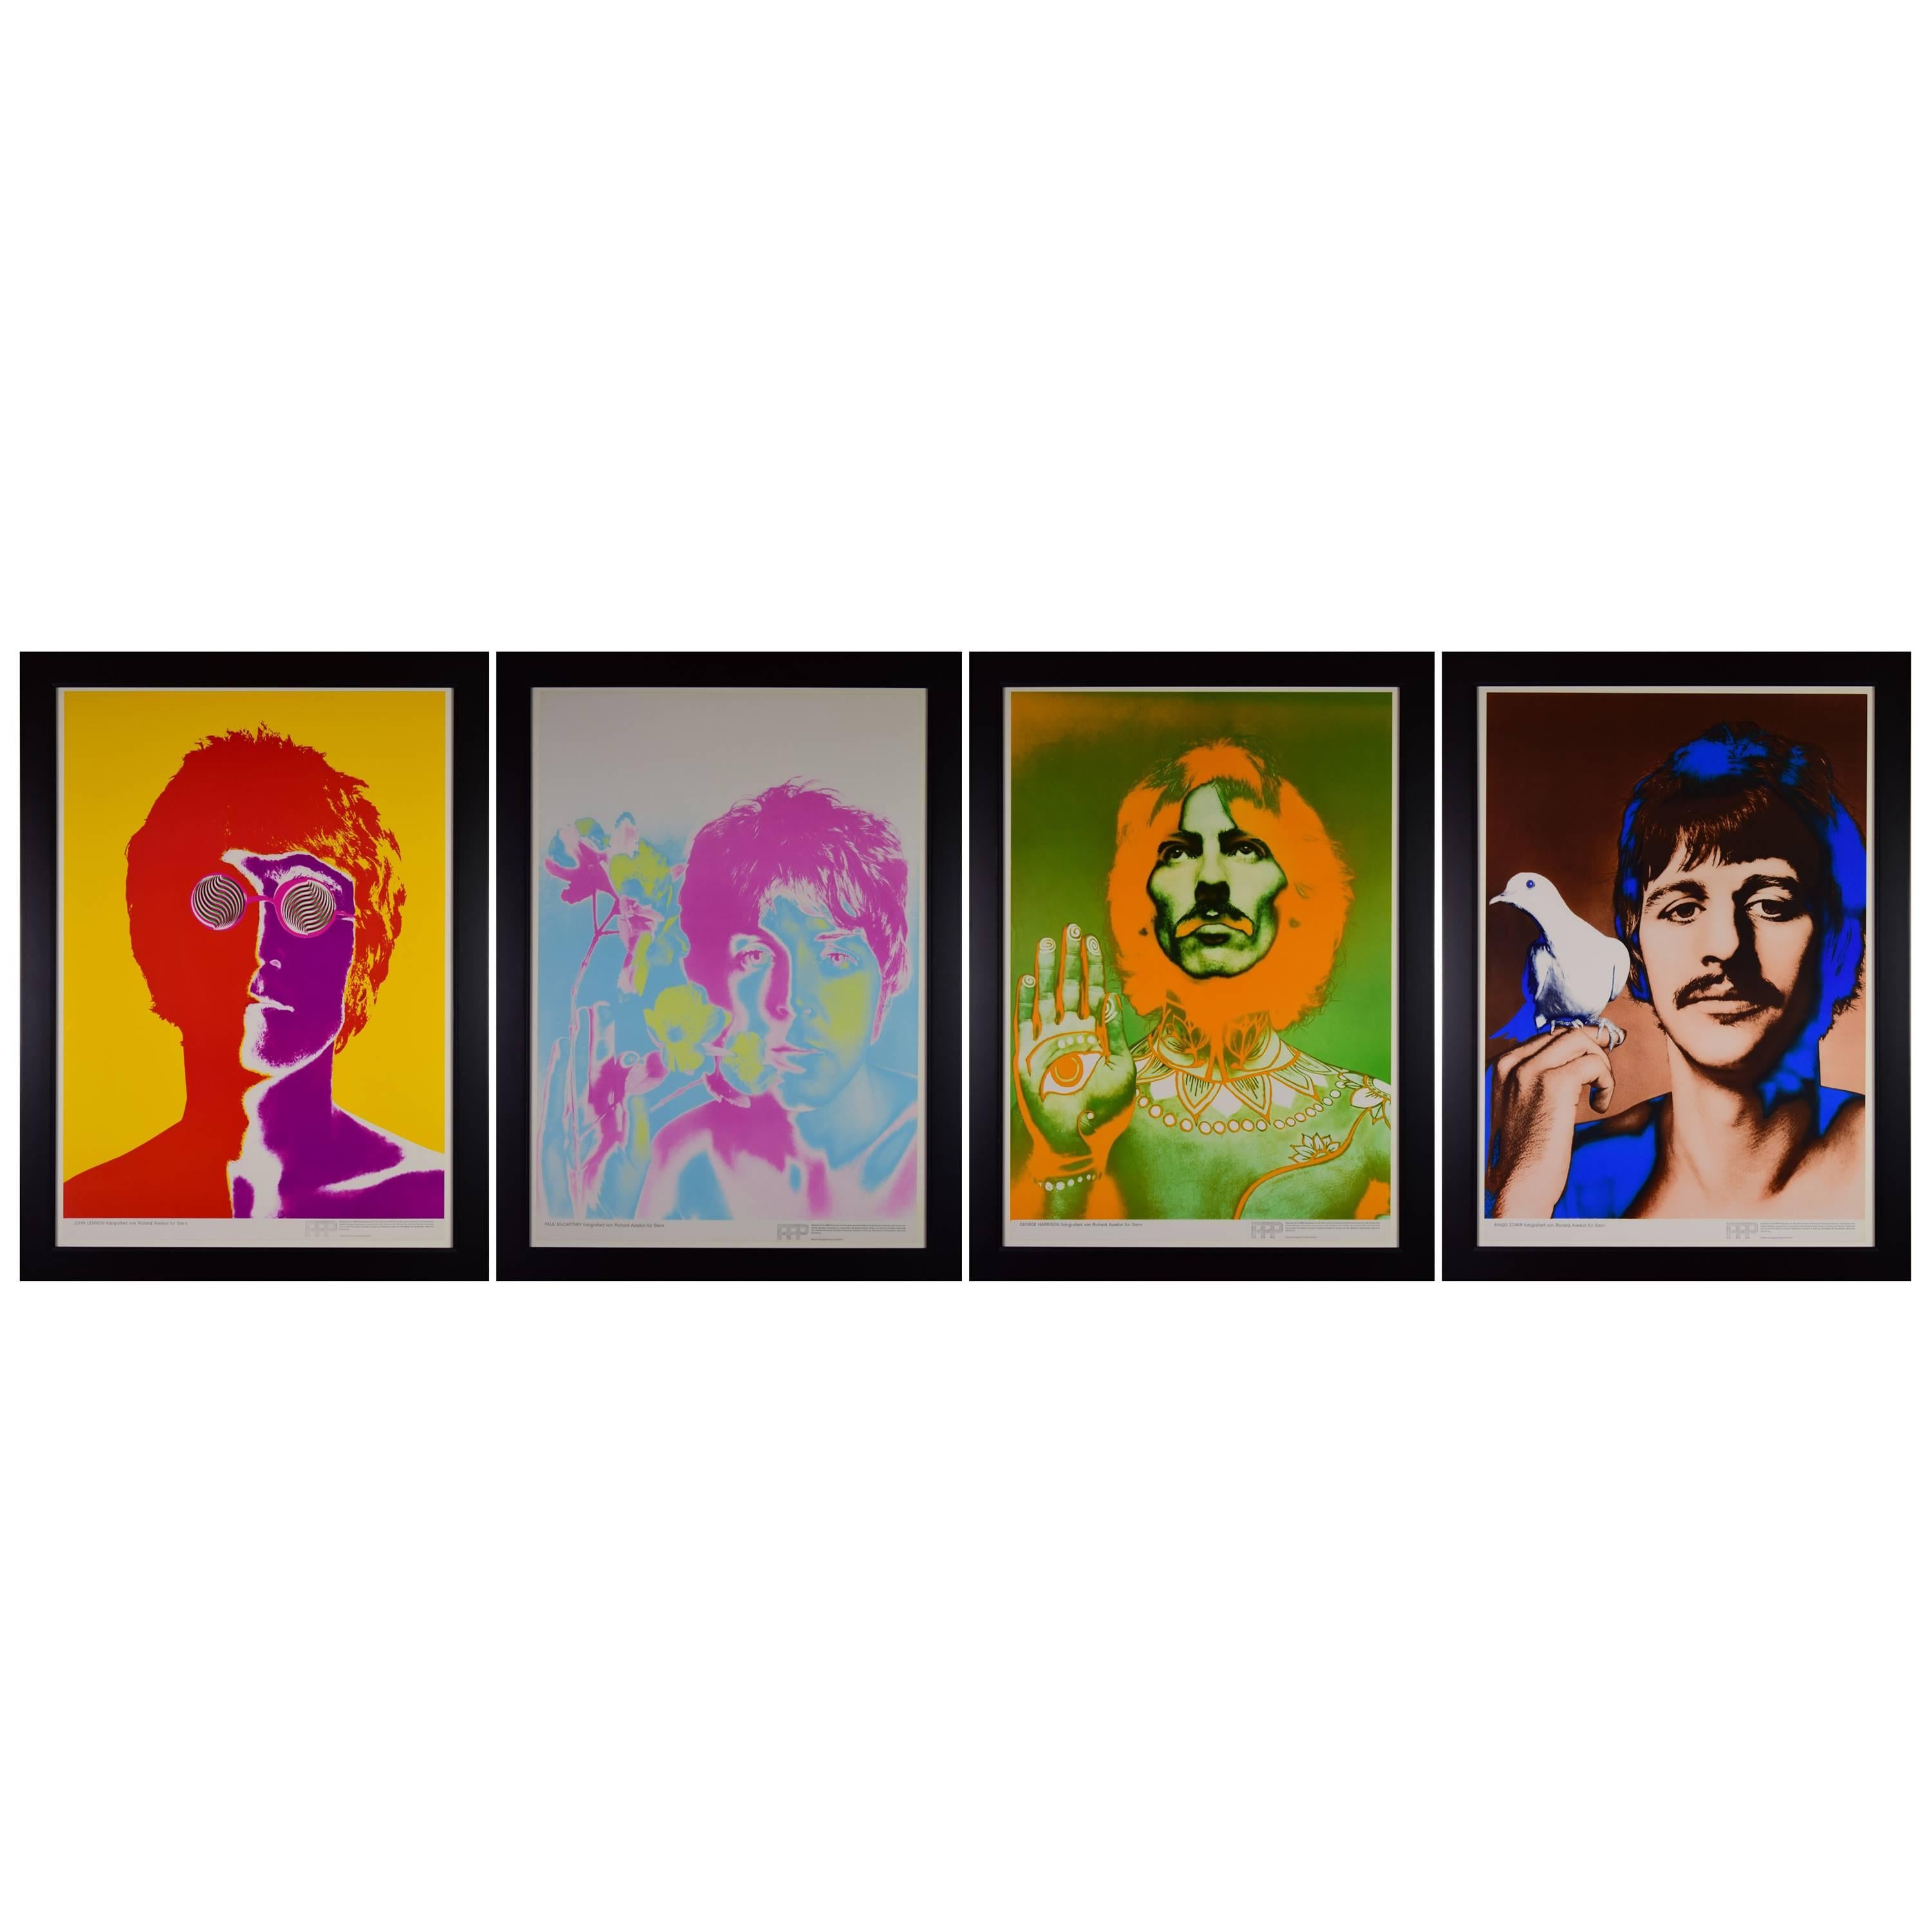 Richard Avedon, "The Beatles, " 1967, Set of Four Color Offset Lithographs